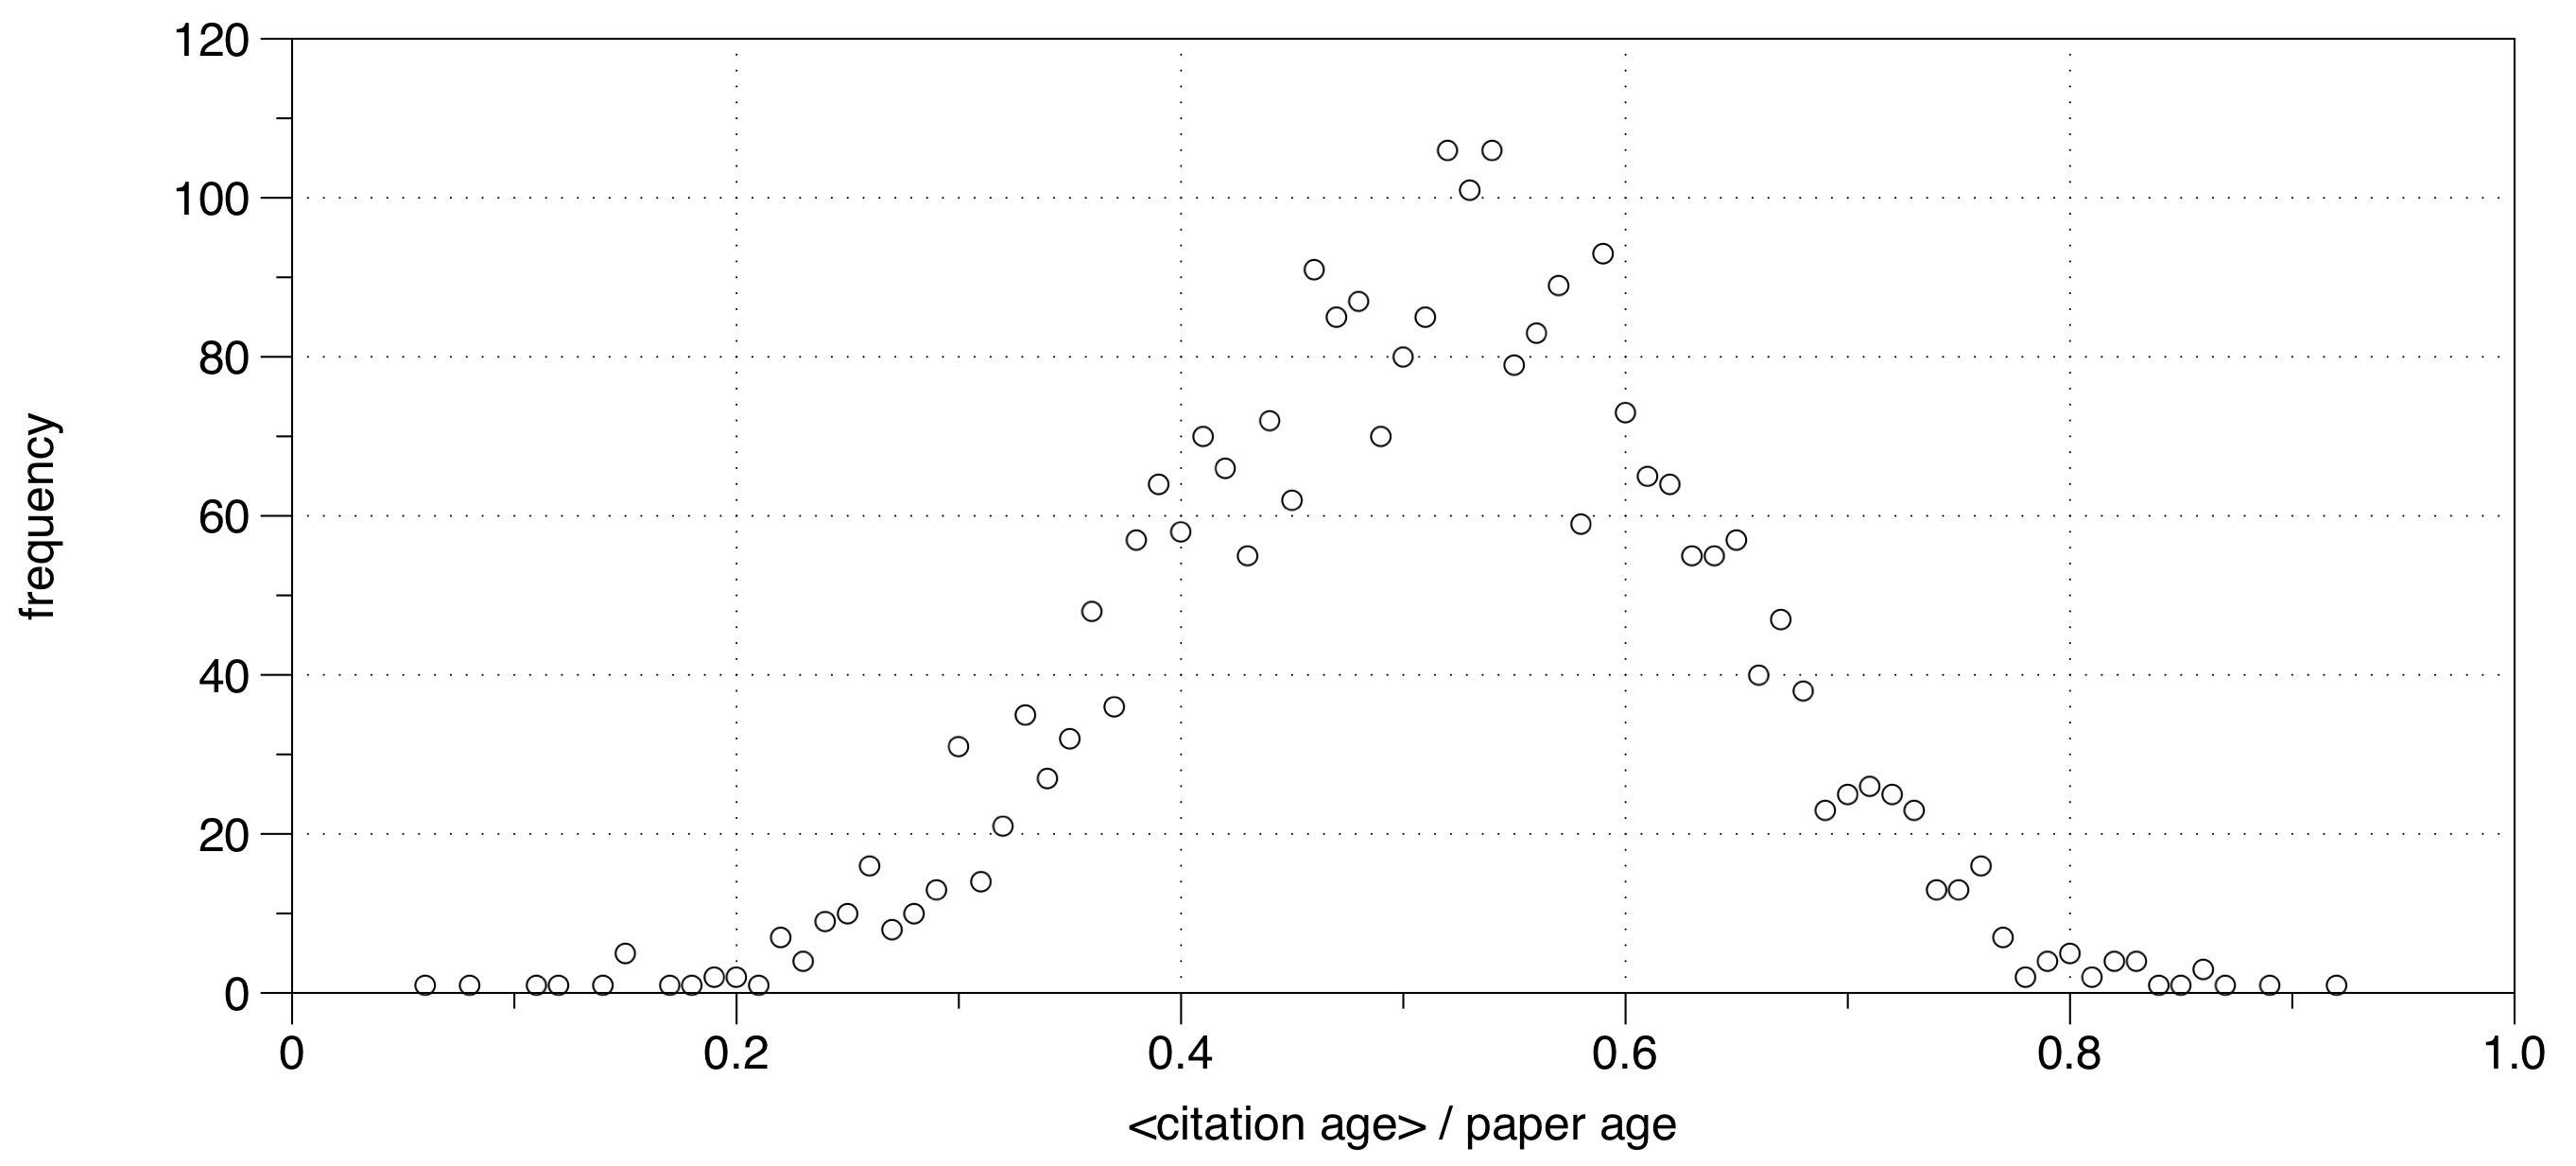 frequency distribution of average citation age over paper age